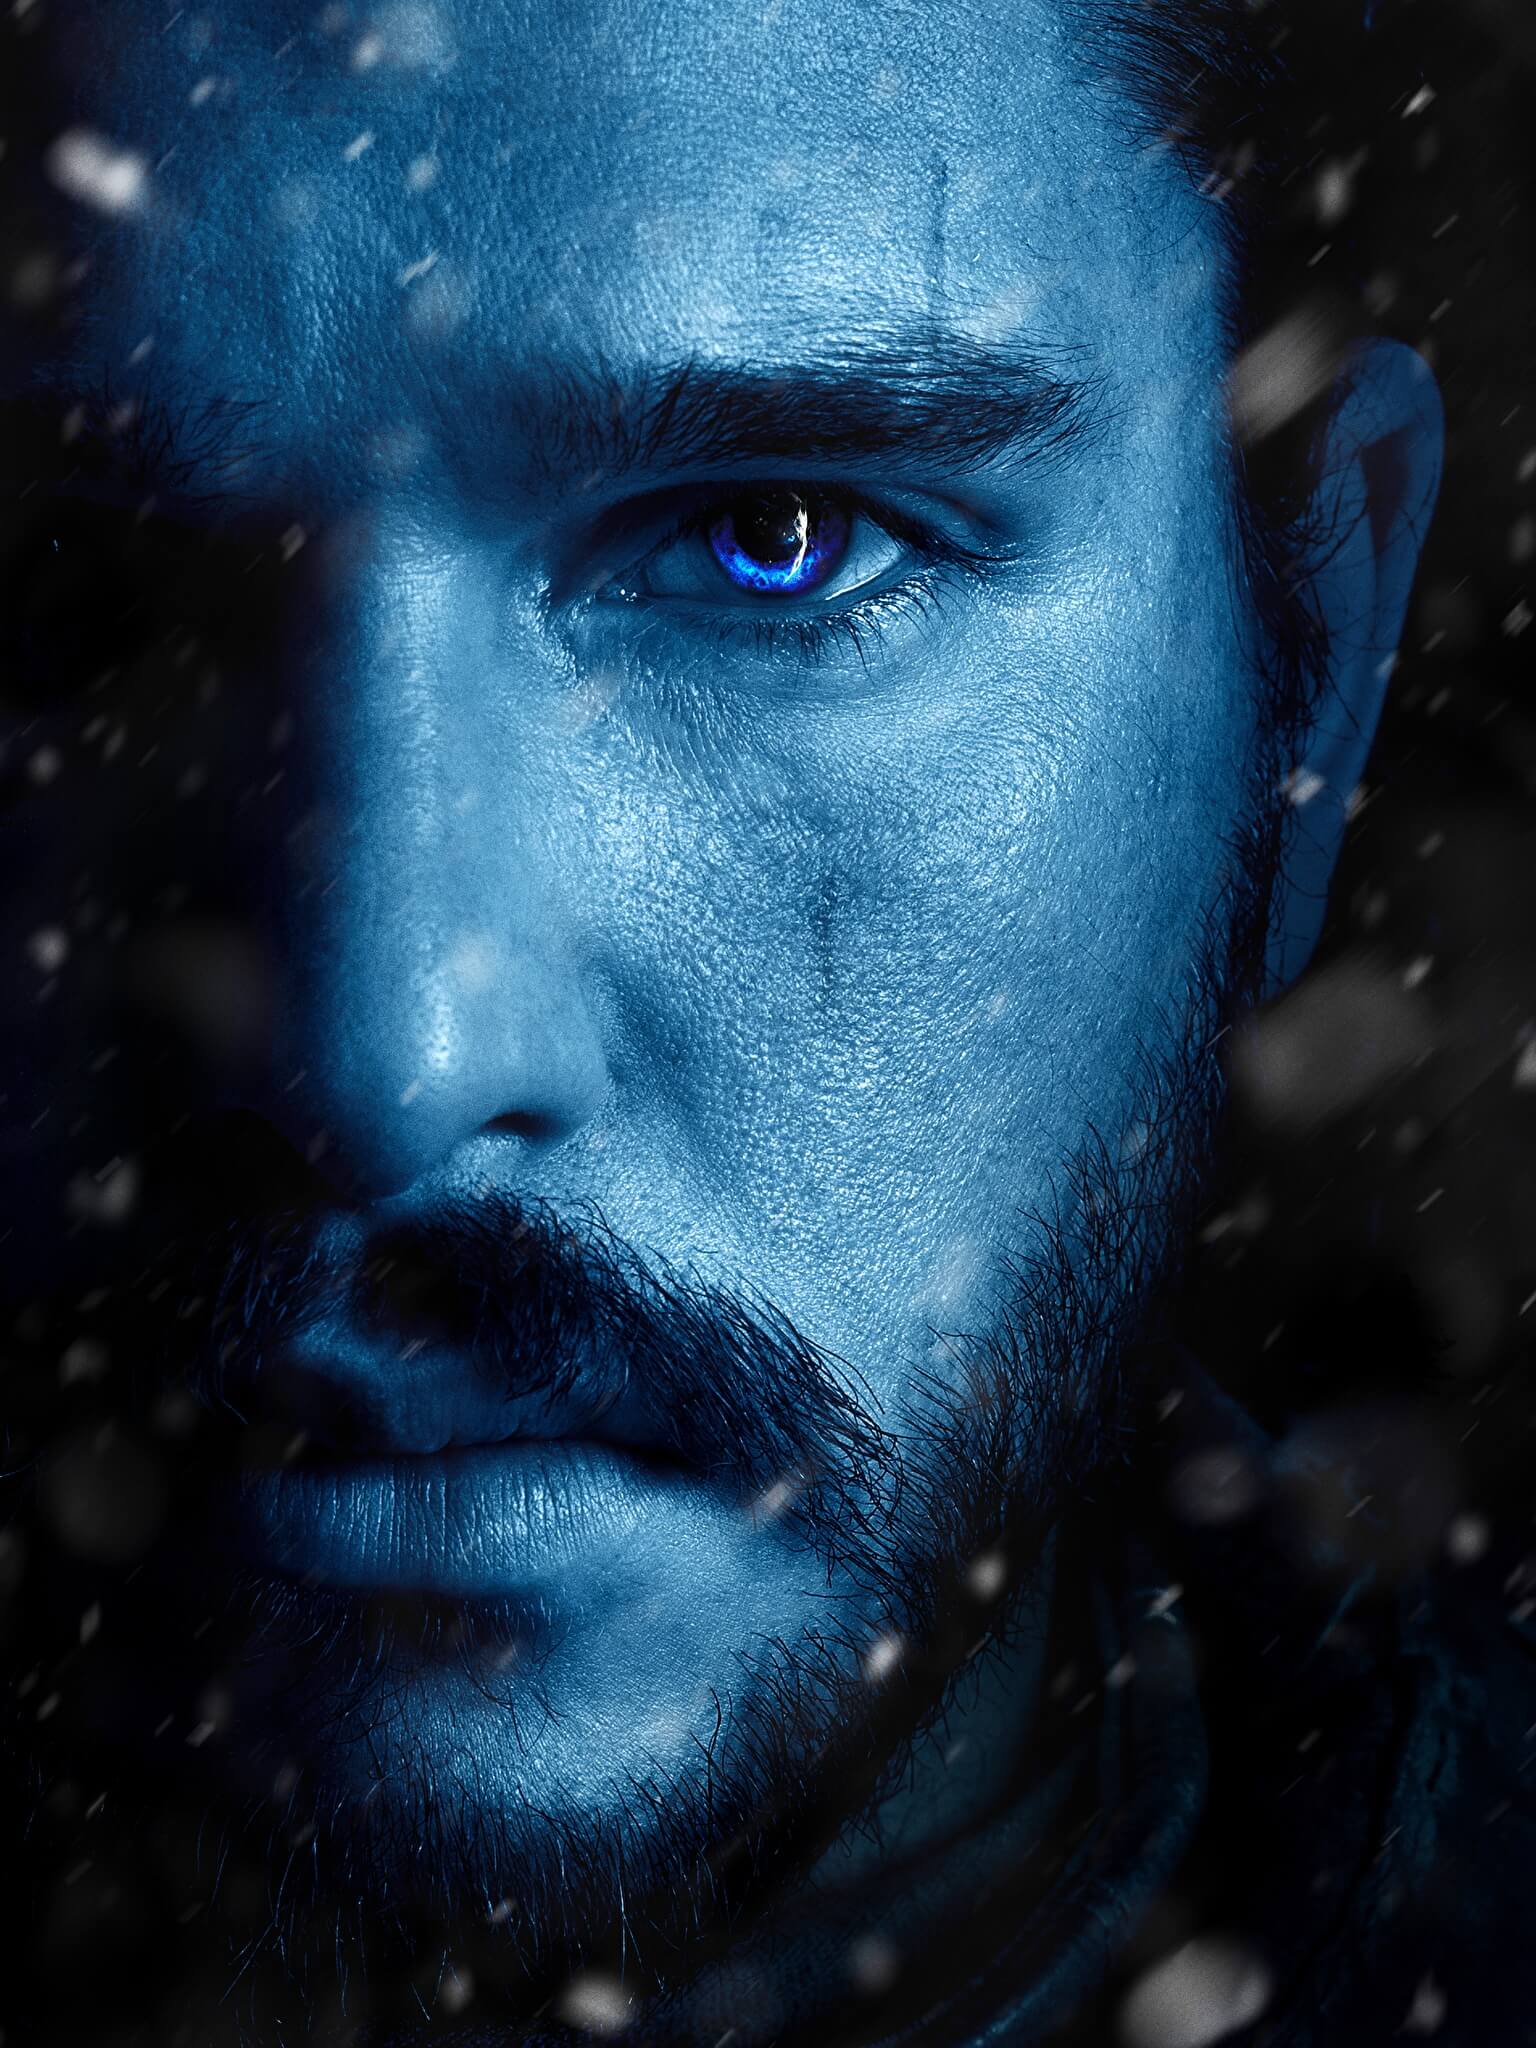 Game Of Thrones Hd Wallpapers For Mobile